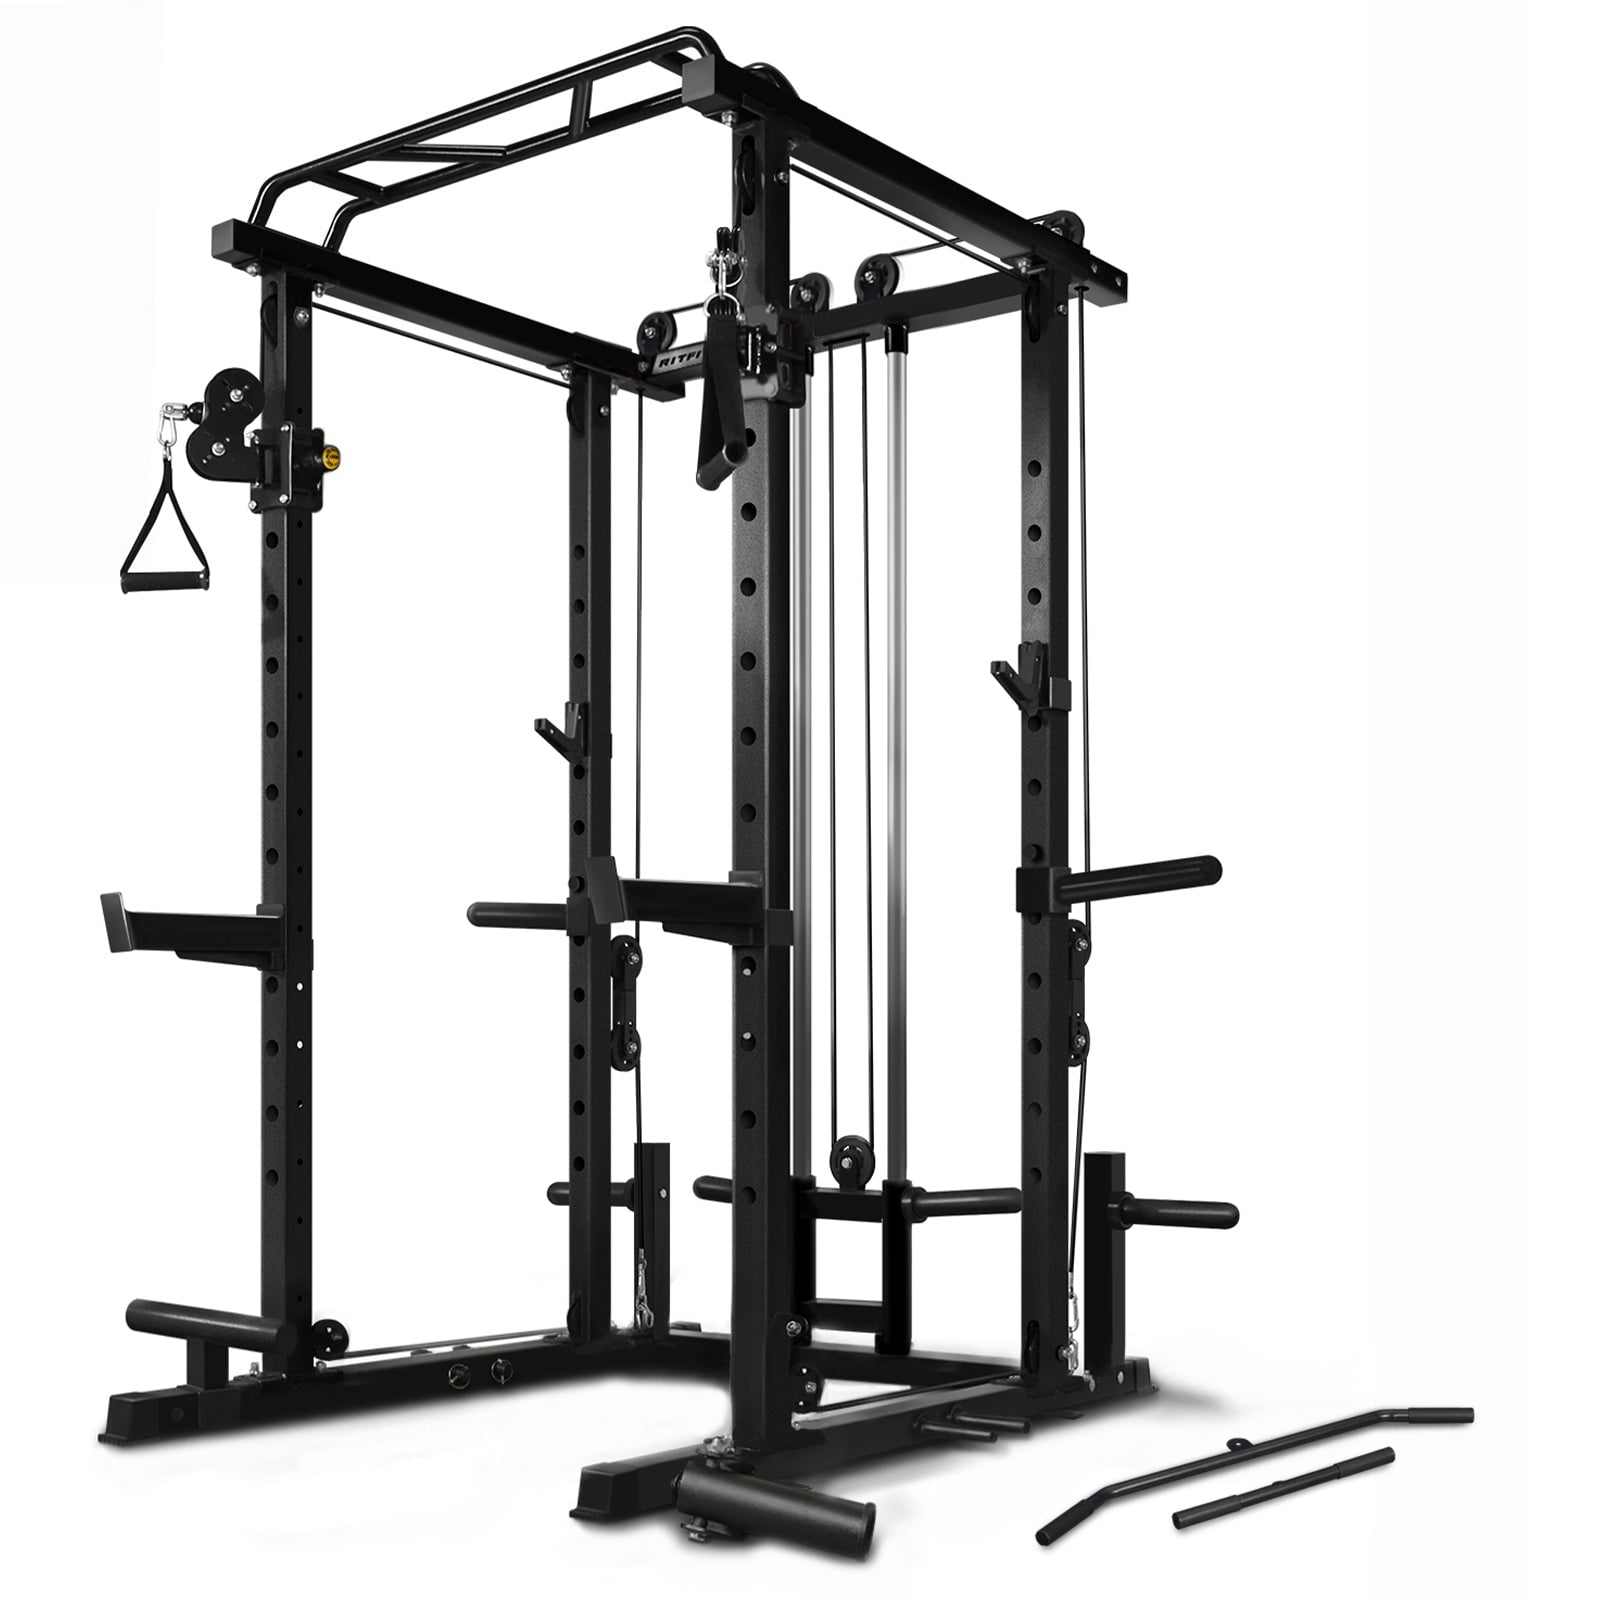 SERTT Home Gym Pulley System, Tricep Workout Pulley System for LAT  Pulldown, Biceps Curl, Triceps, Shoulders, Back, Forearm Workout, Weight  Cable Pulley System for Squat Rack, Garage, Exercise Machine Attachments 